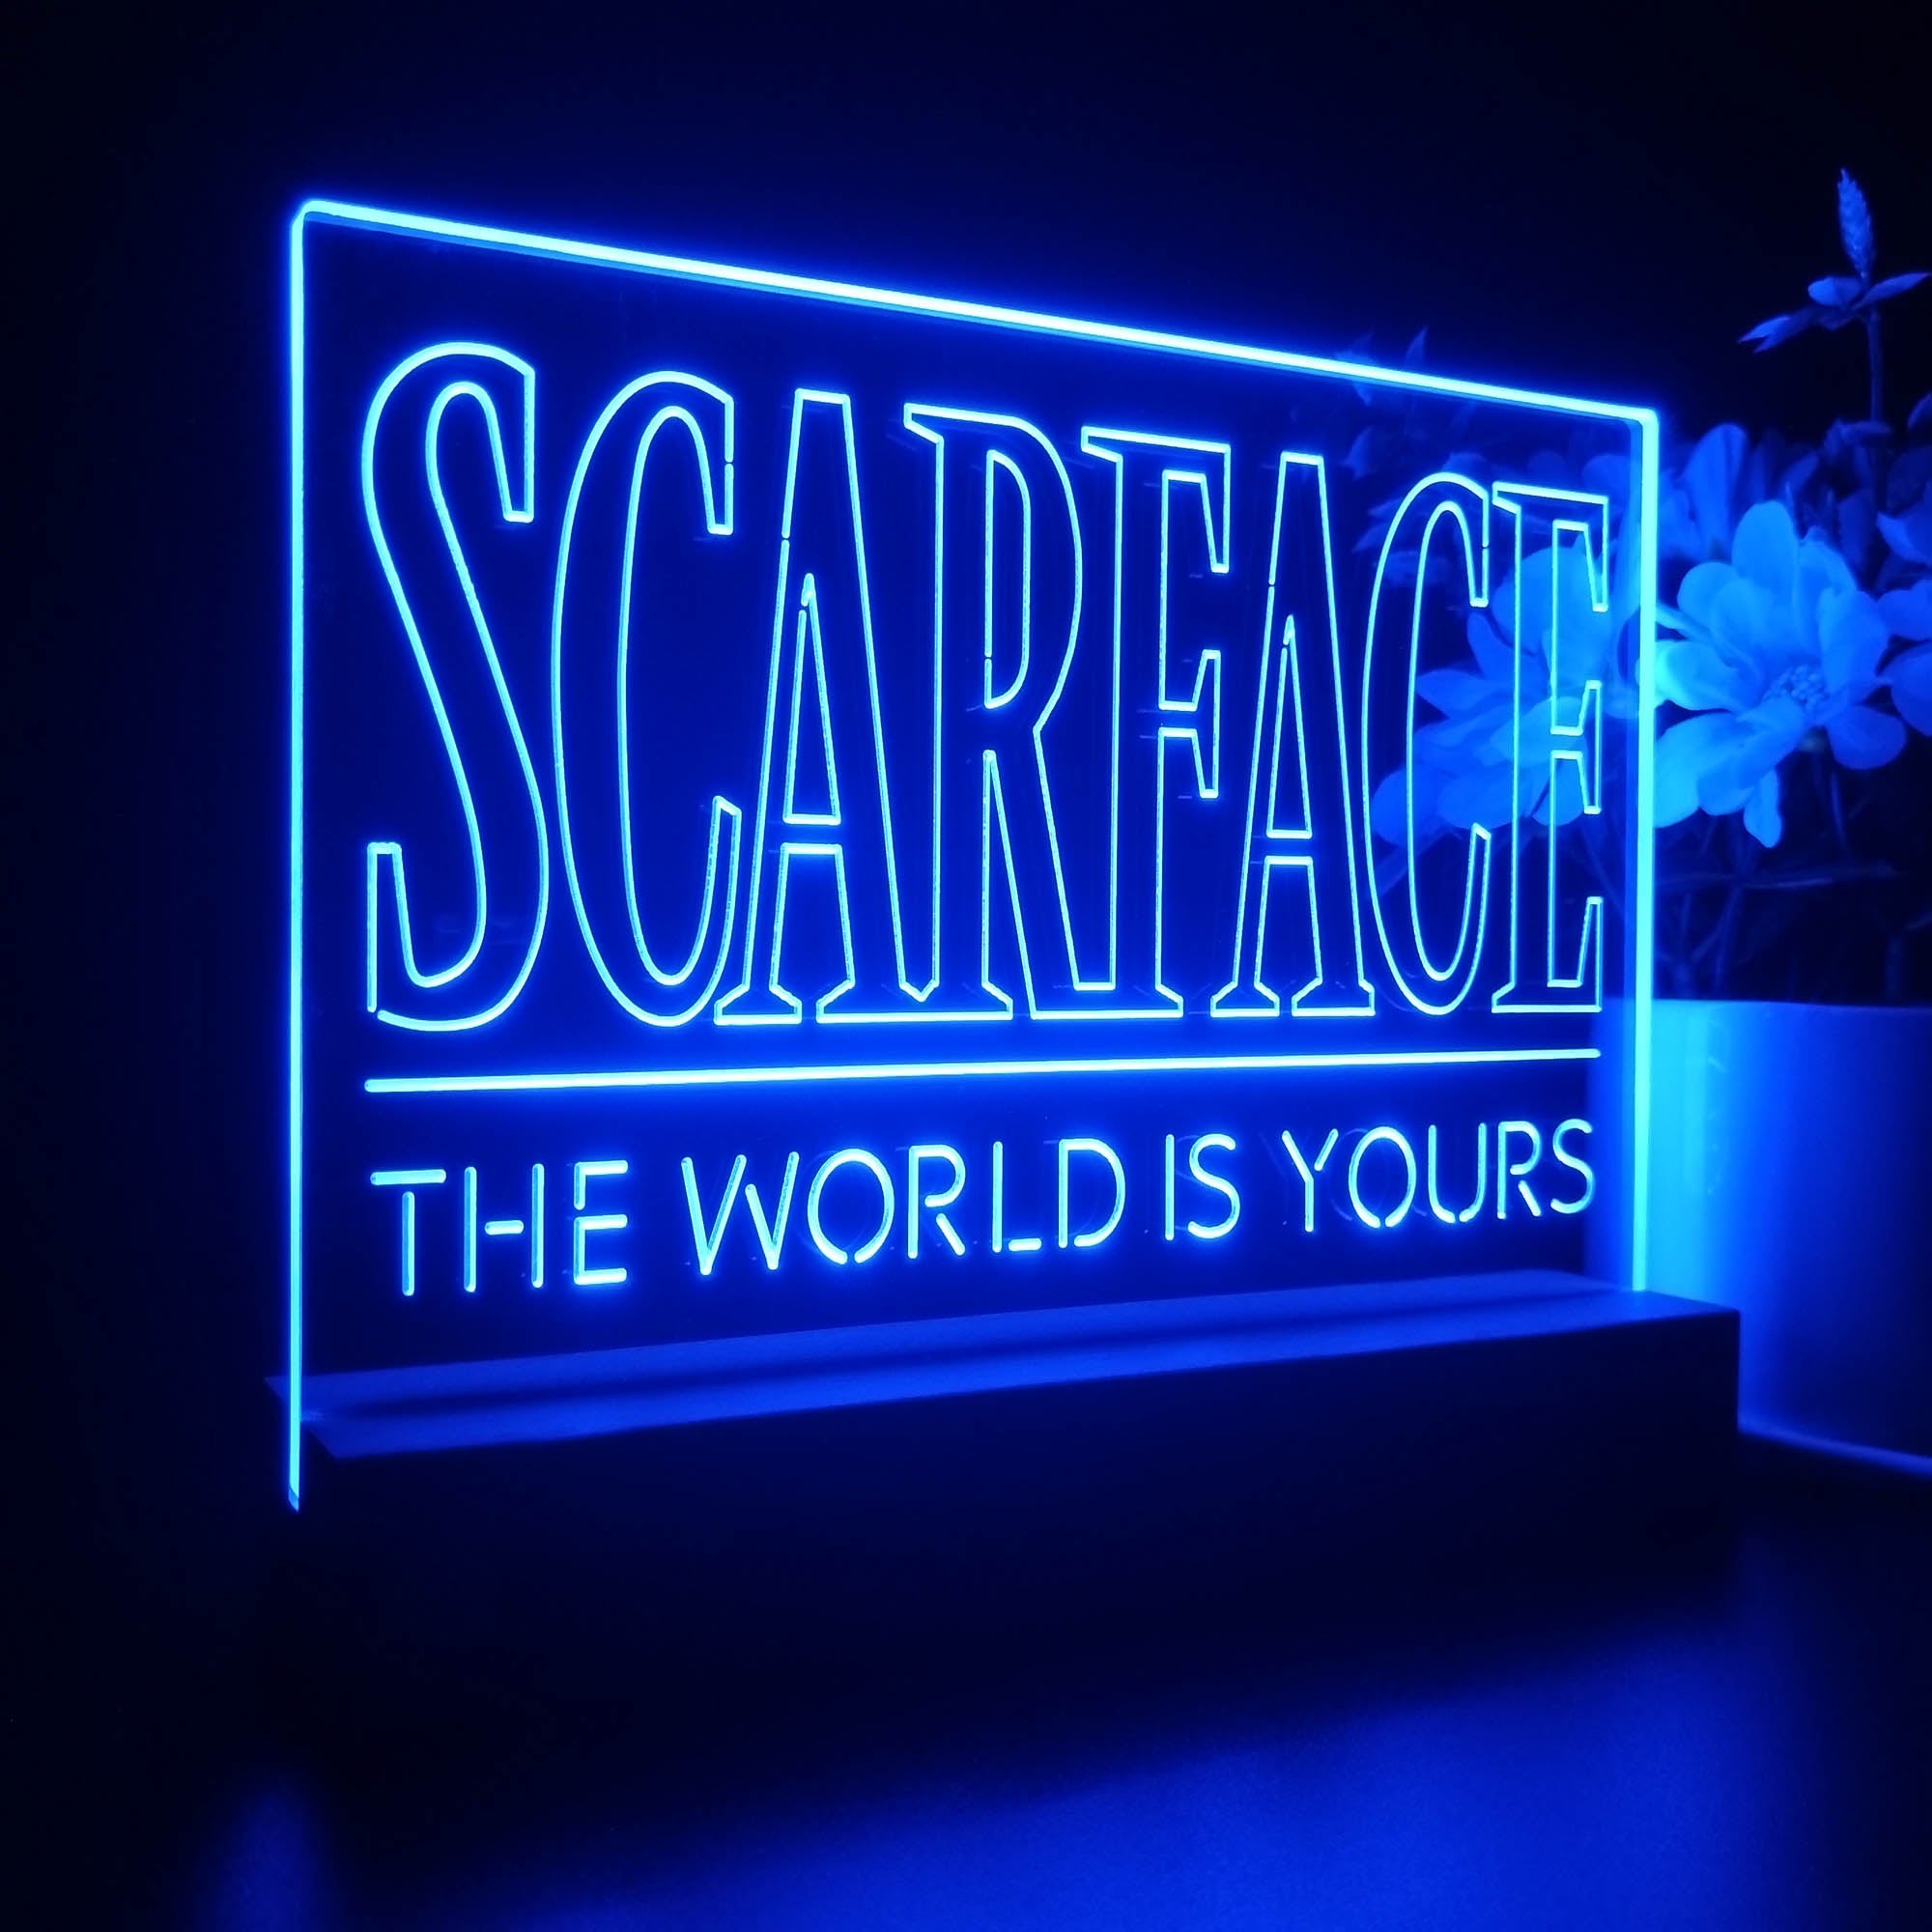 Scarface The World is Yours 3D LED Illusion Night Light